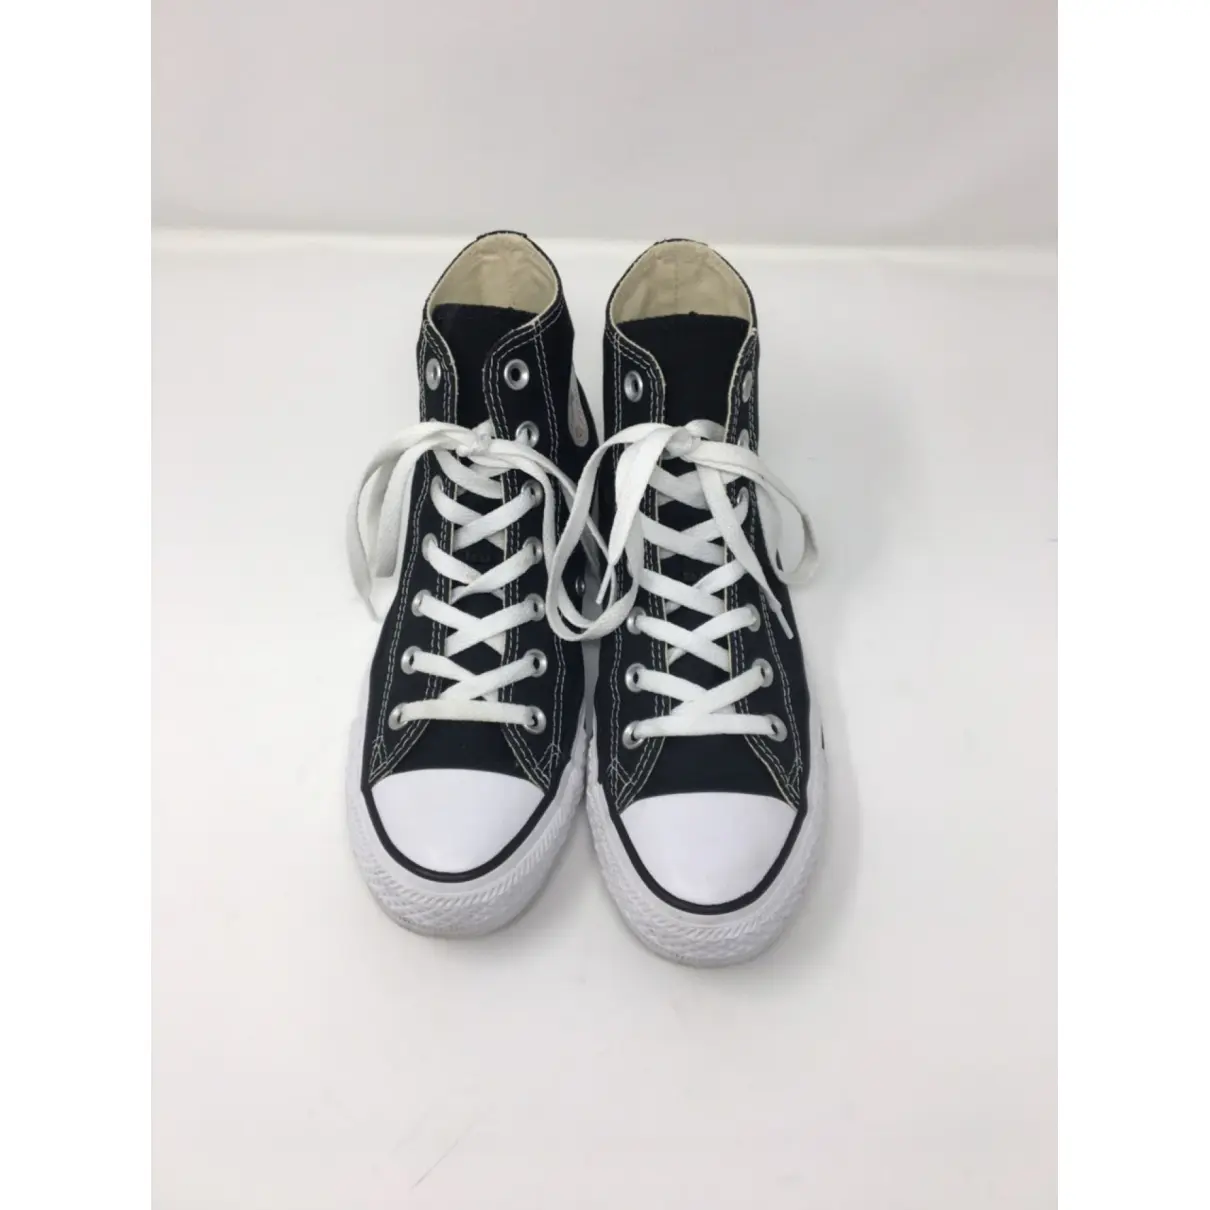 Buy Converse Cloth trainers online